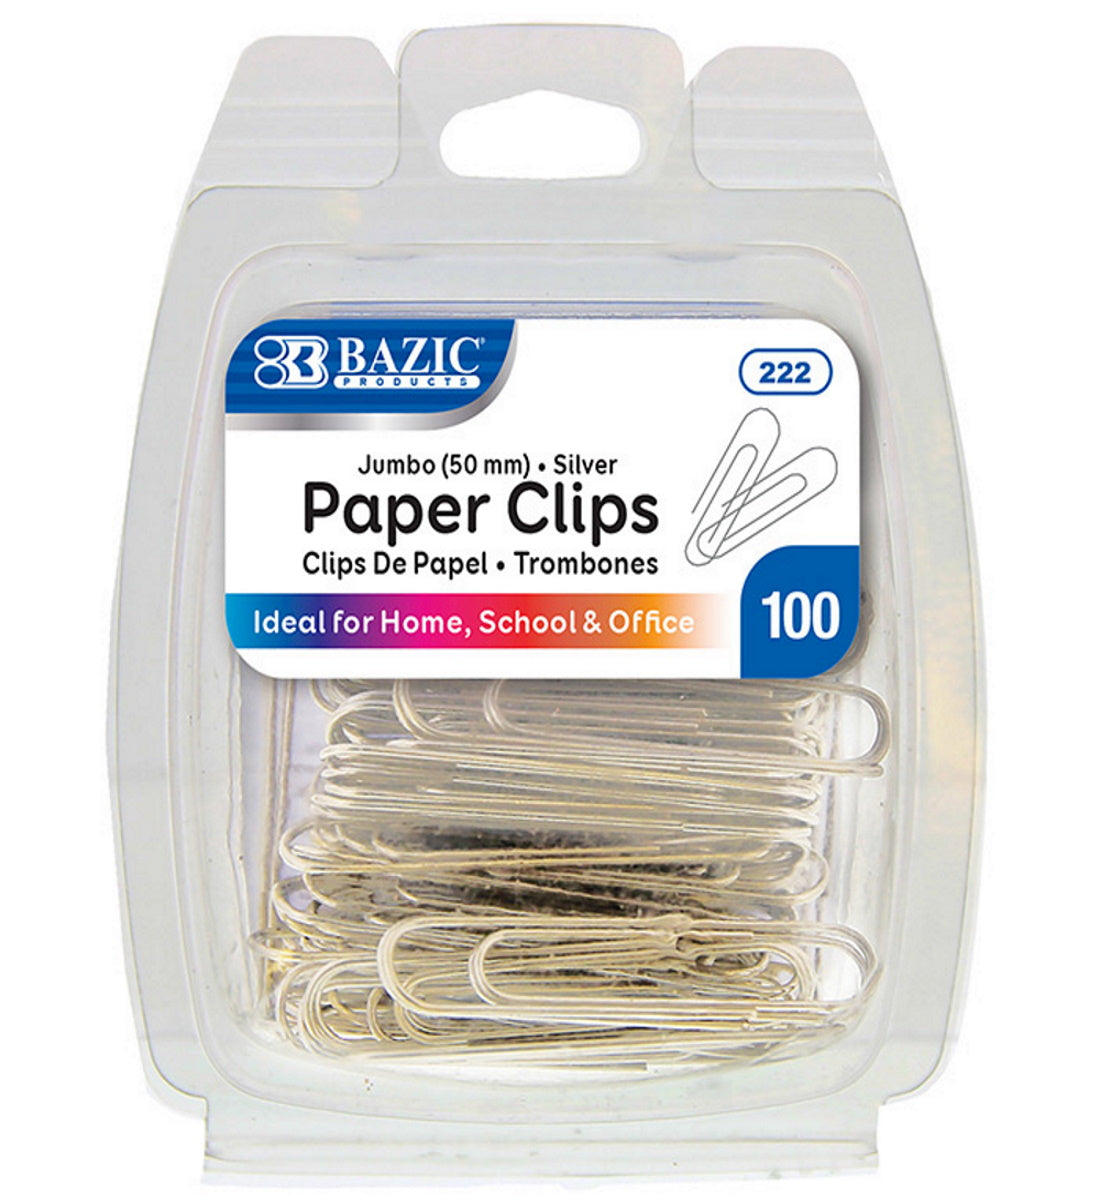 BAZIC 100 Large Jumbo Paper Clips (50mm) Silver Smooth Finish Craft Home School Office